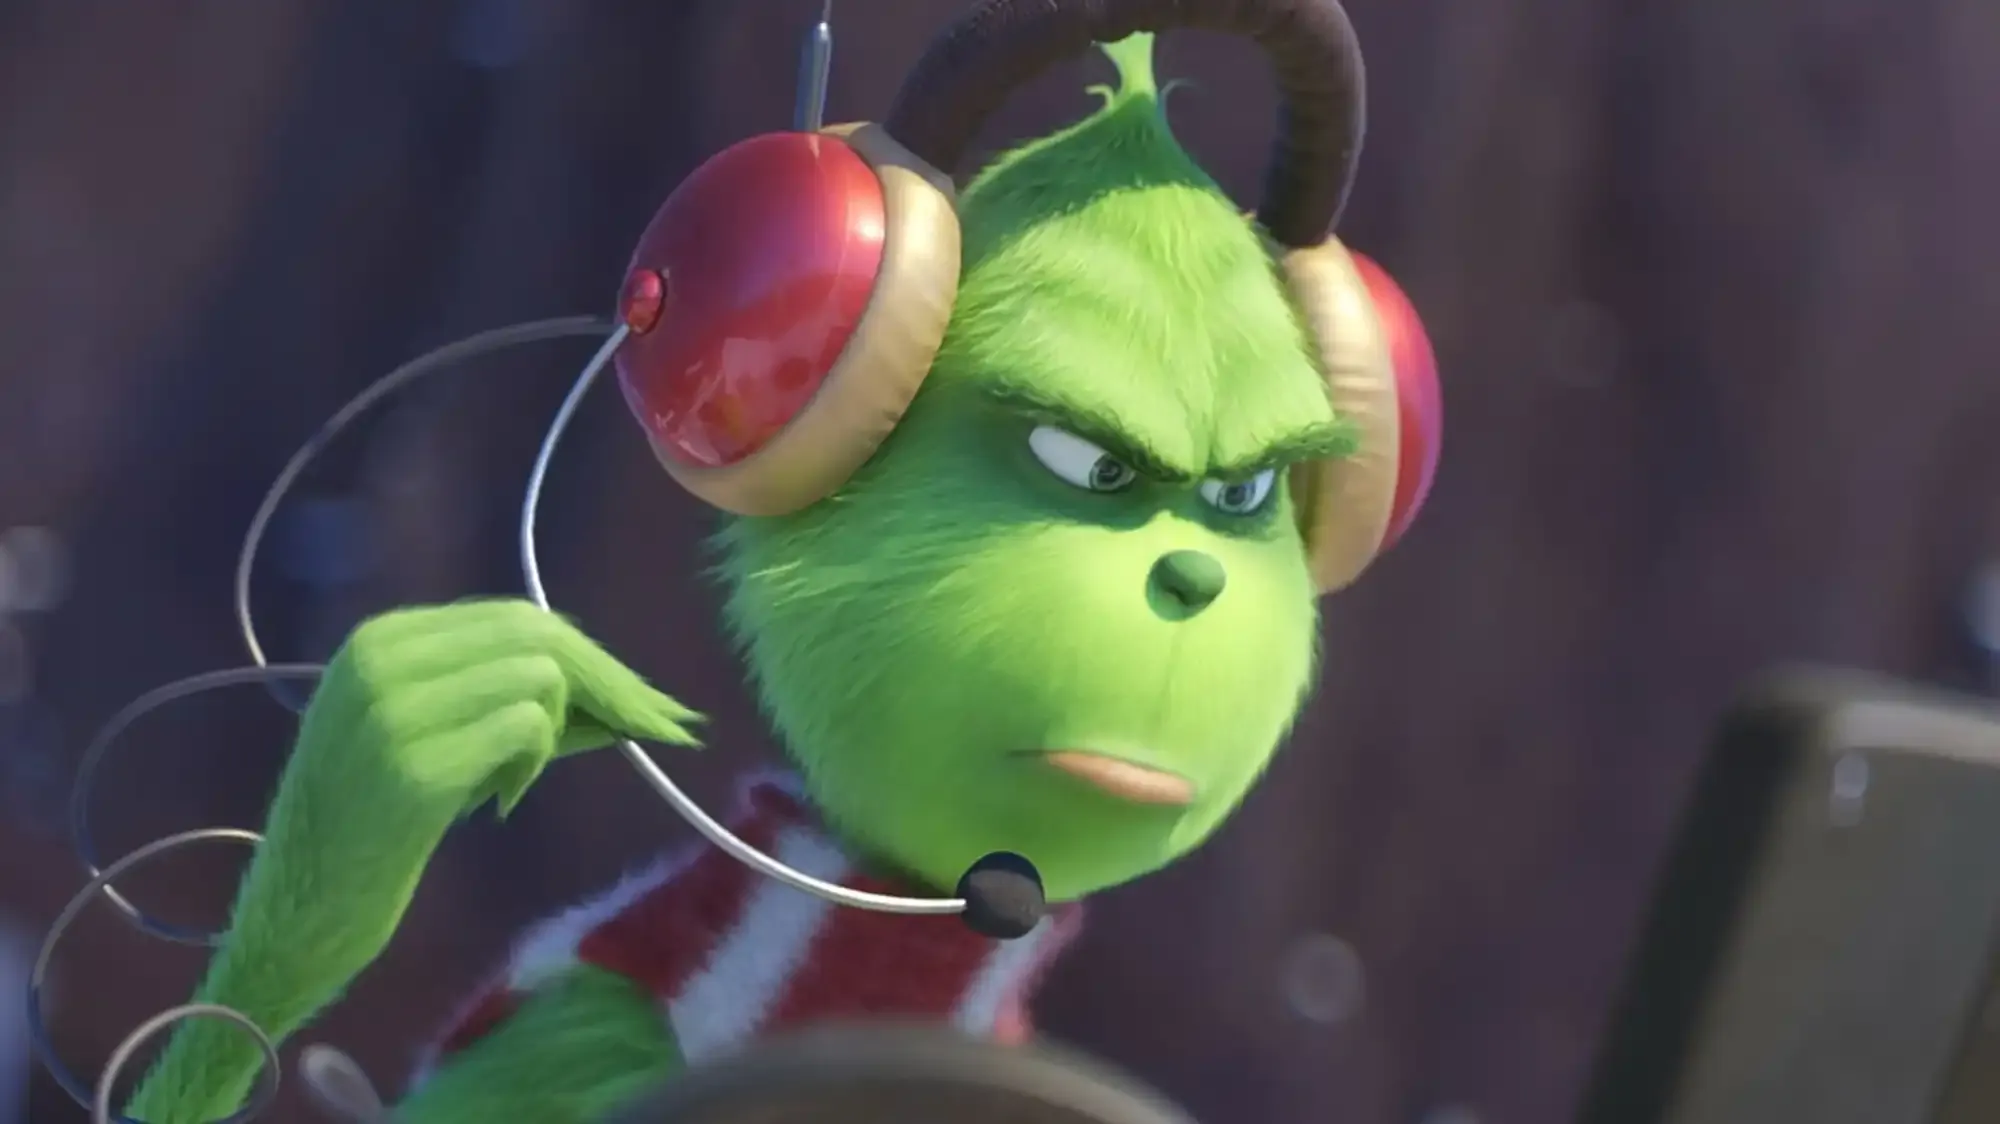 The Grinch movie review